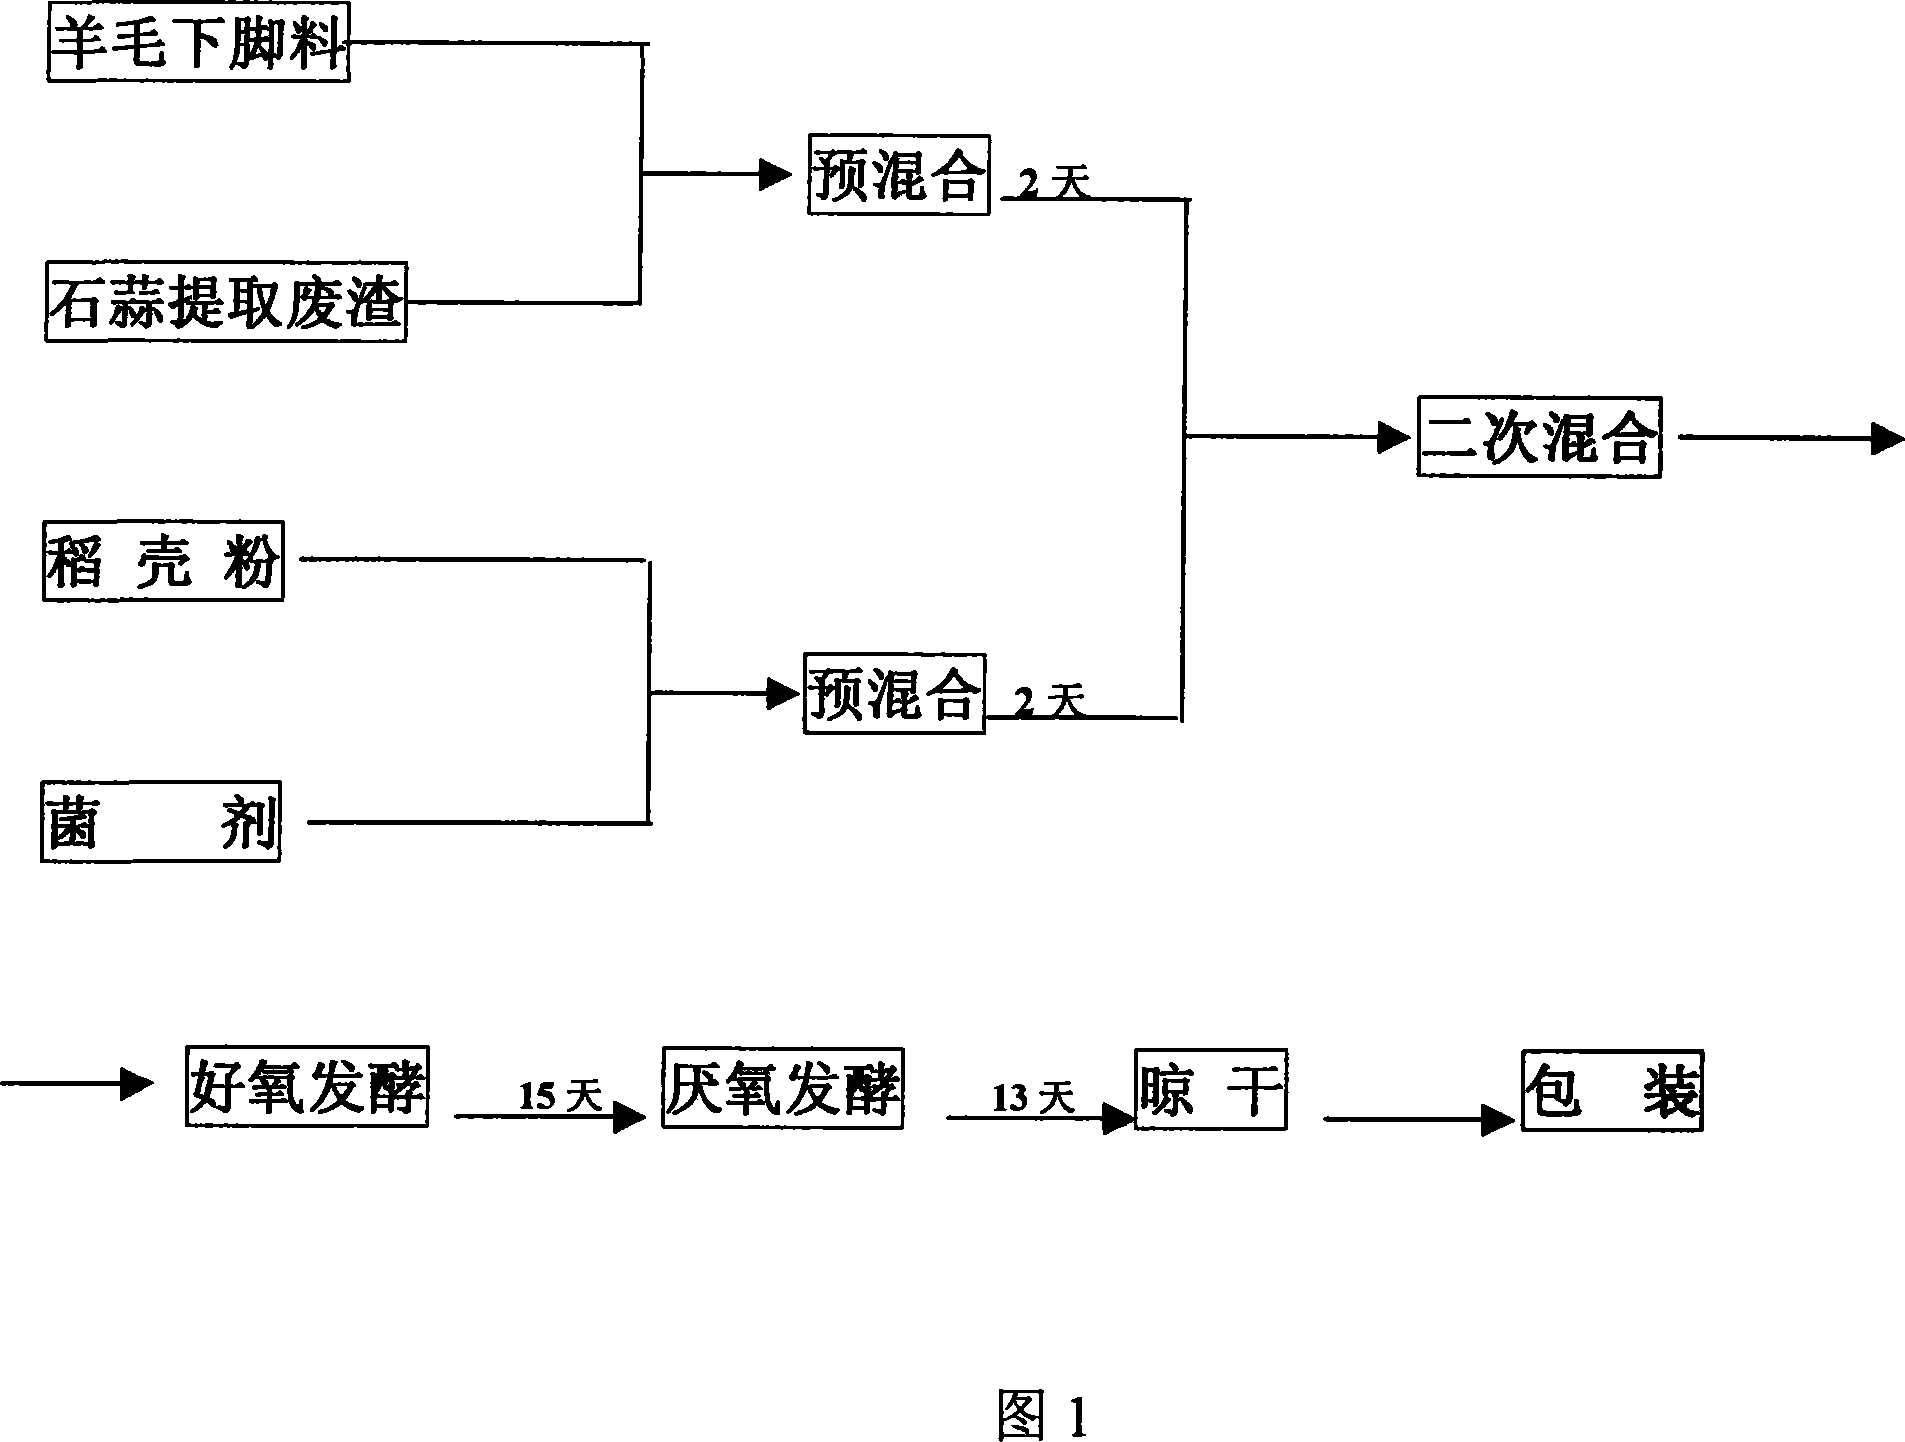 Method for preparing biological organic fertilizer by using wool offcuts and Lycoris radiata extraction waste residue